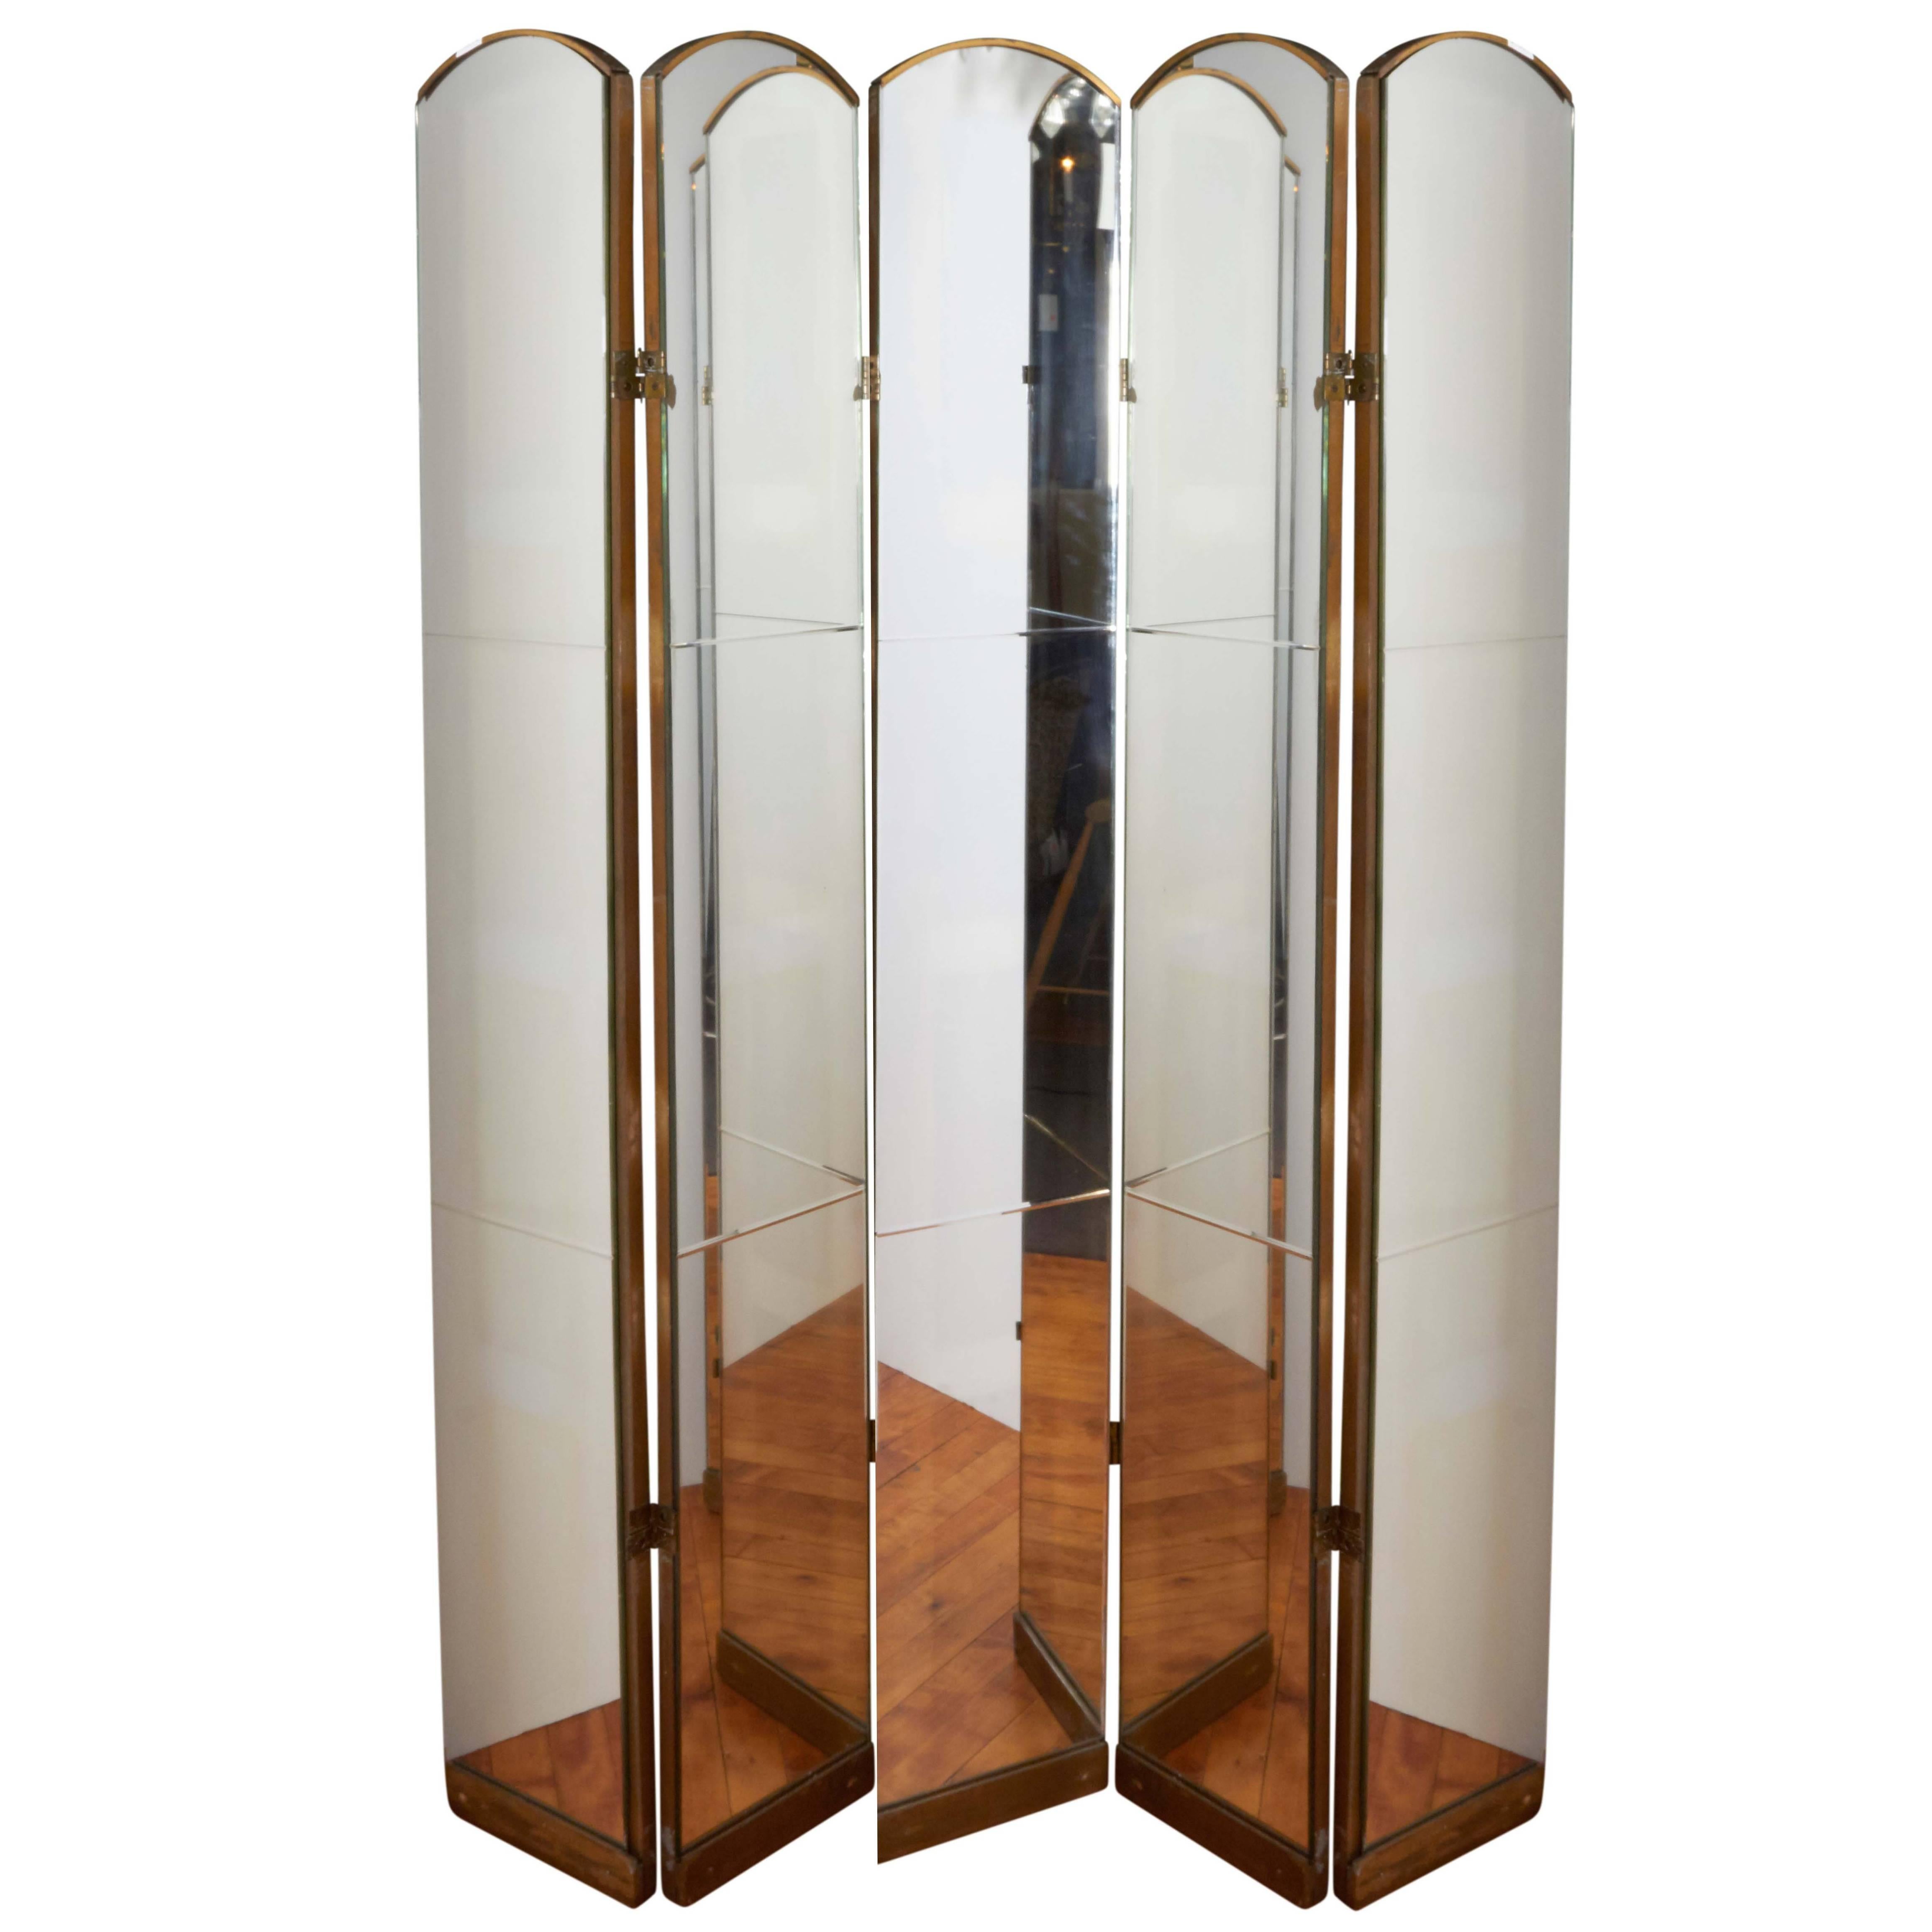 Pair of Arched Five-Panel Room Dividers